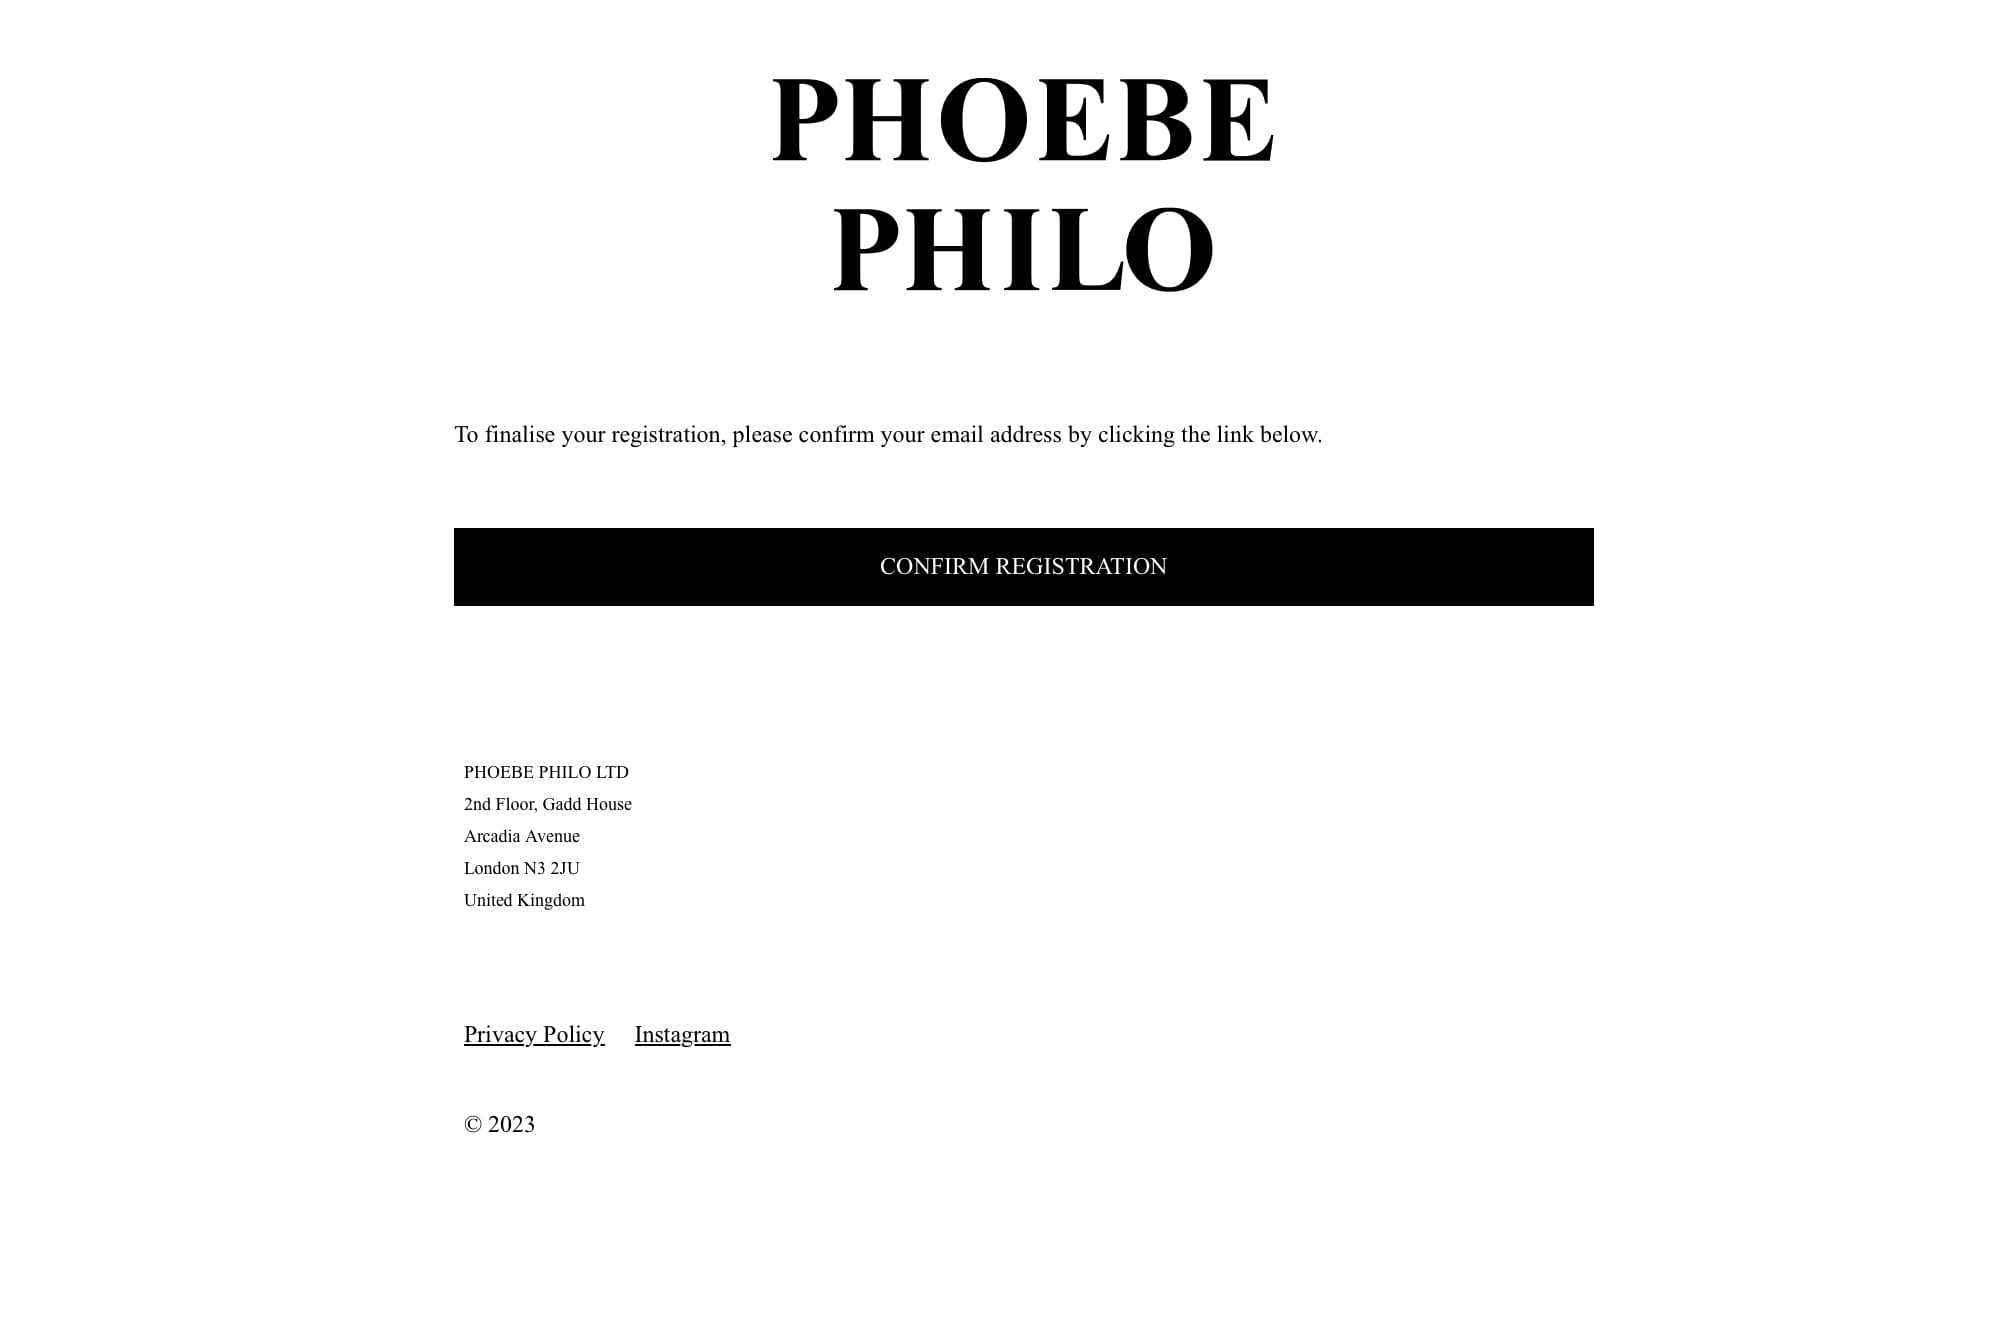 Drop Everything! Phoebe Philo's Website Is Open for Registration